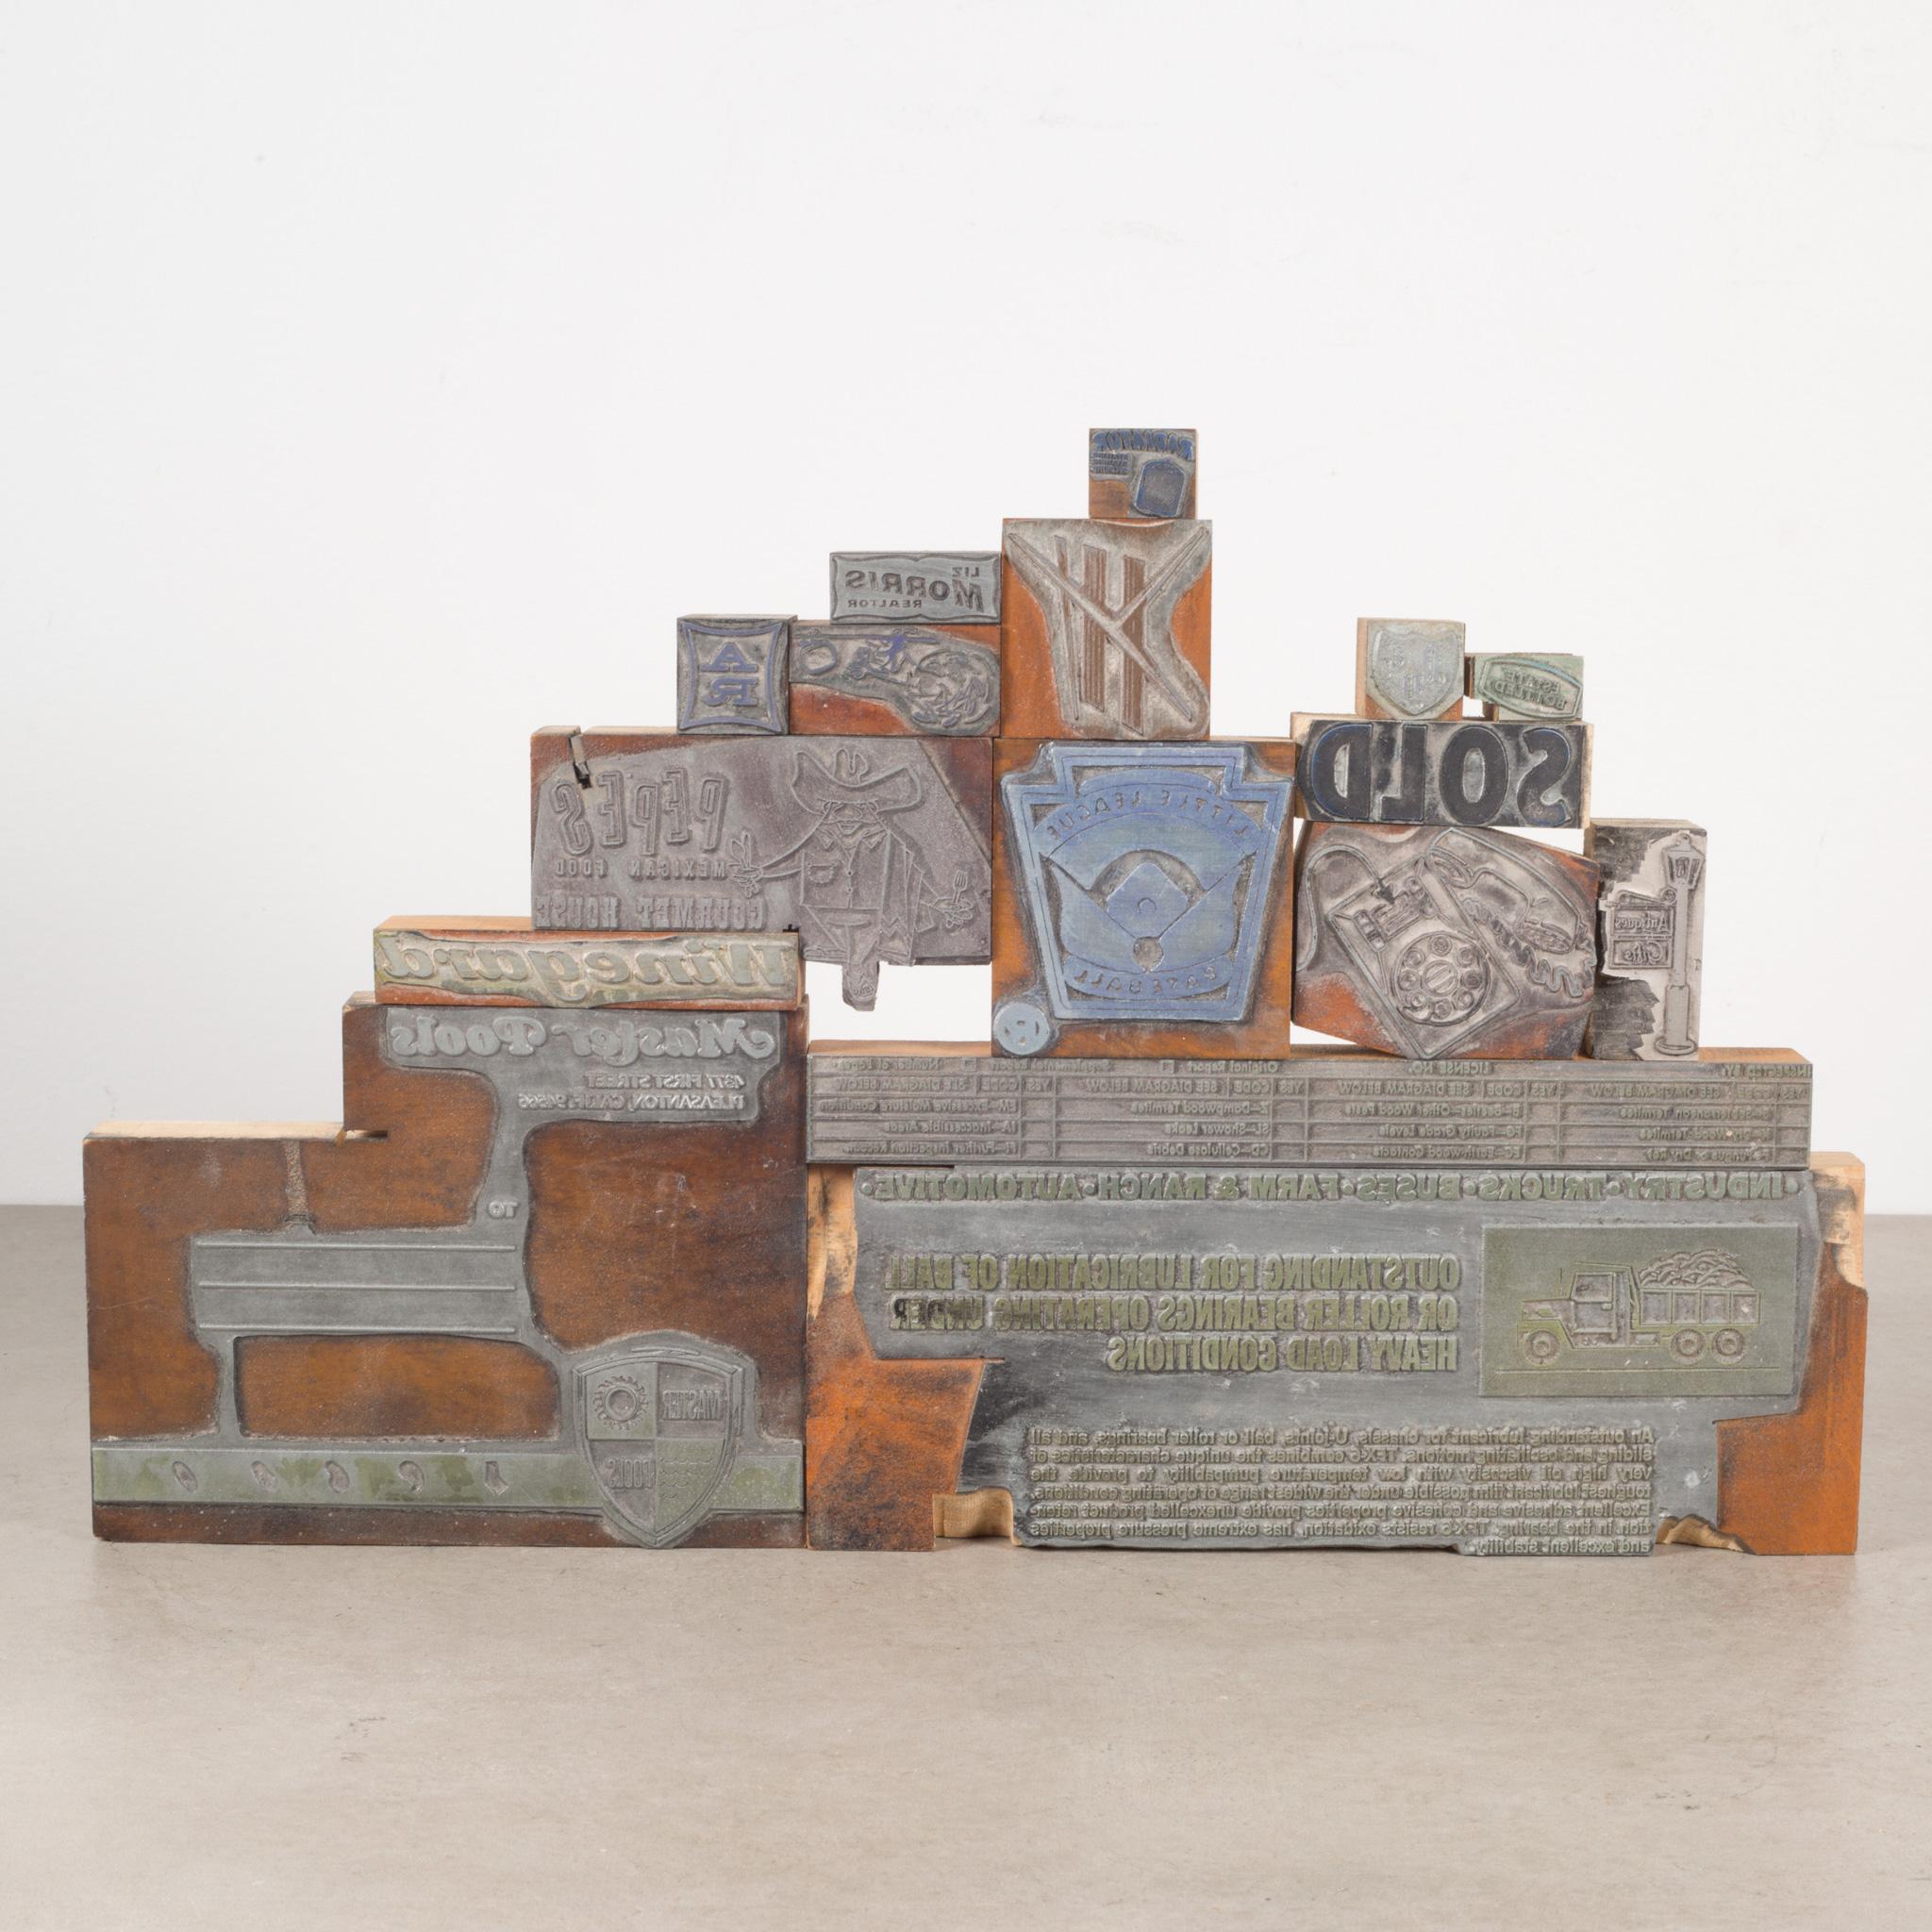 About

A collection of 16 individual metal and wood typeset print blocks used in advertising. Sold as a set.

Creator unknown.
Date of manufacture circa 1940.
Materials and techniques metal on wood.
Condition good minor wear.
Dimensions H 10